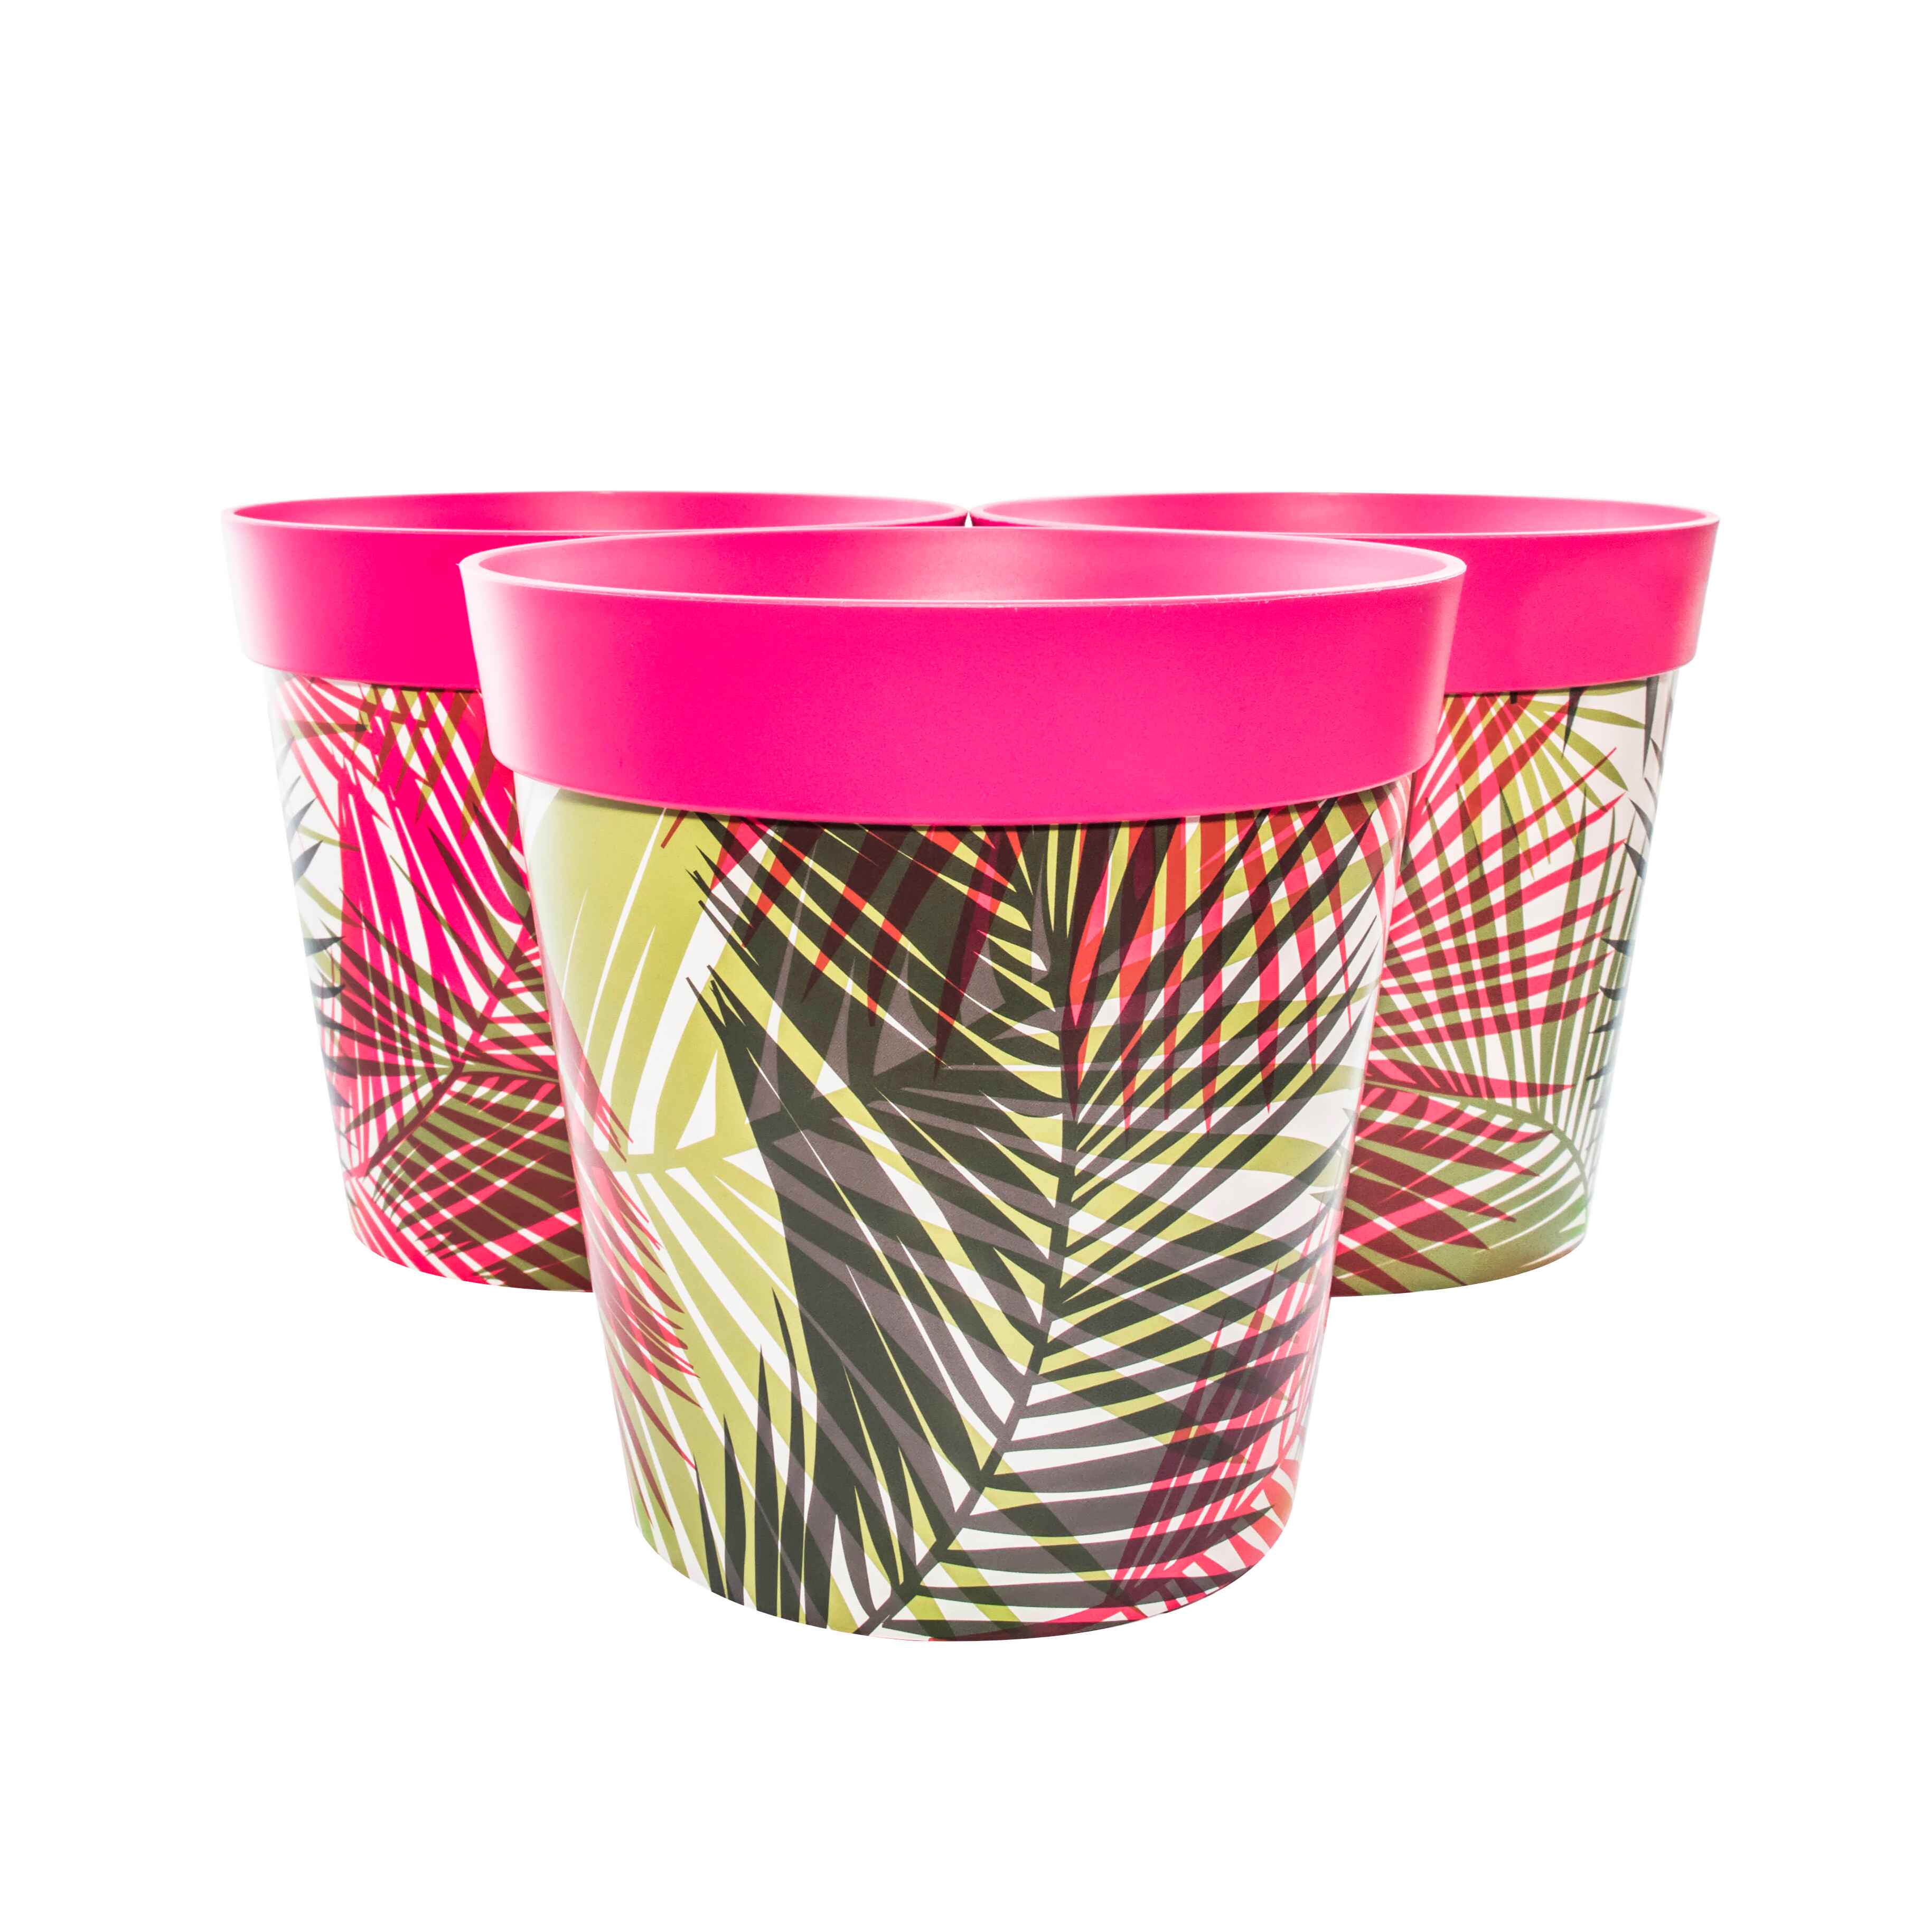 Picture of 3 Large 25cm Plastic Pink Palm Leaves Pattern Indoor/Outdoor Flowerpots